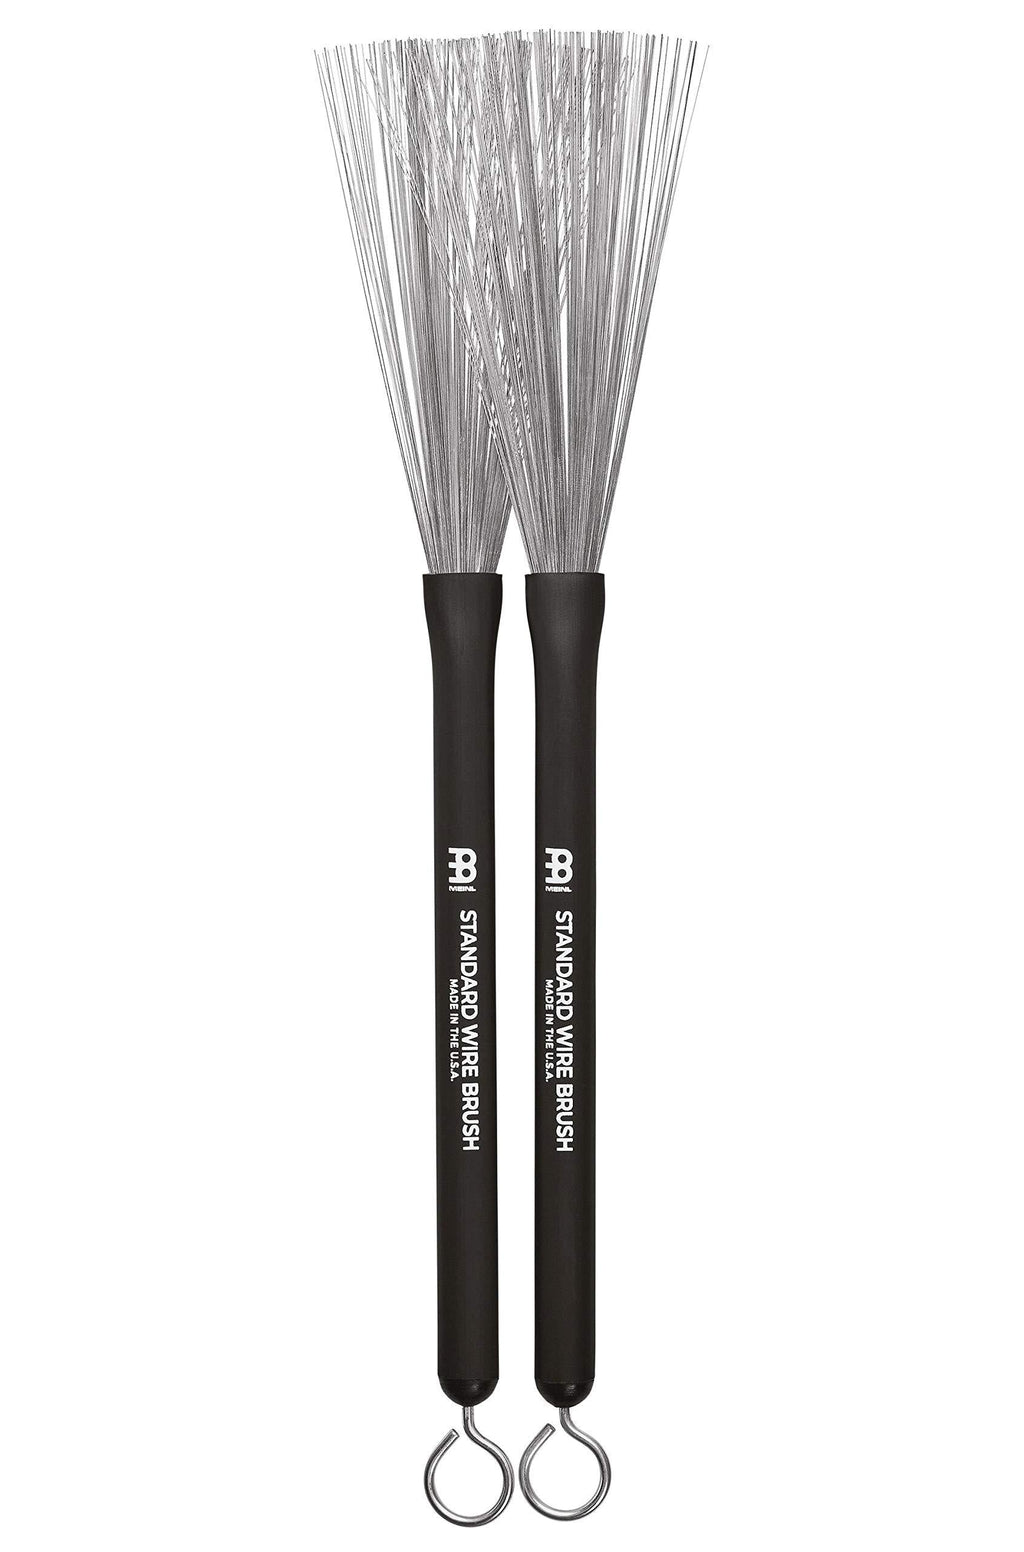 Meinl Stick & Brush Standard Brush with Retractable Wires and Push/Pull Rods - MADE IN U.S.A. (SB300)